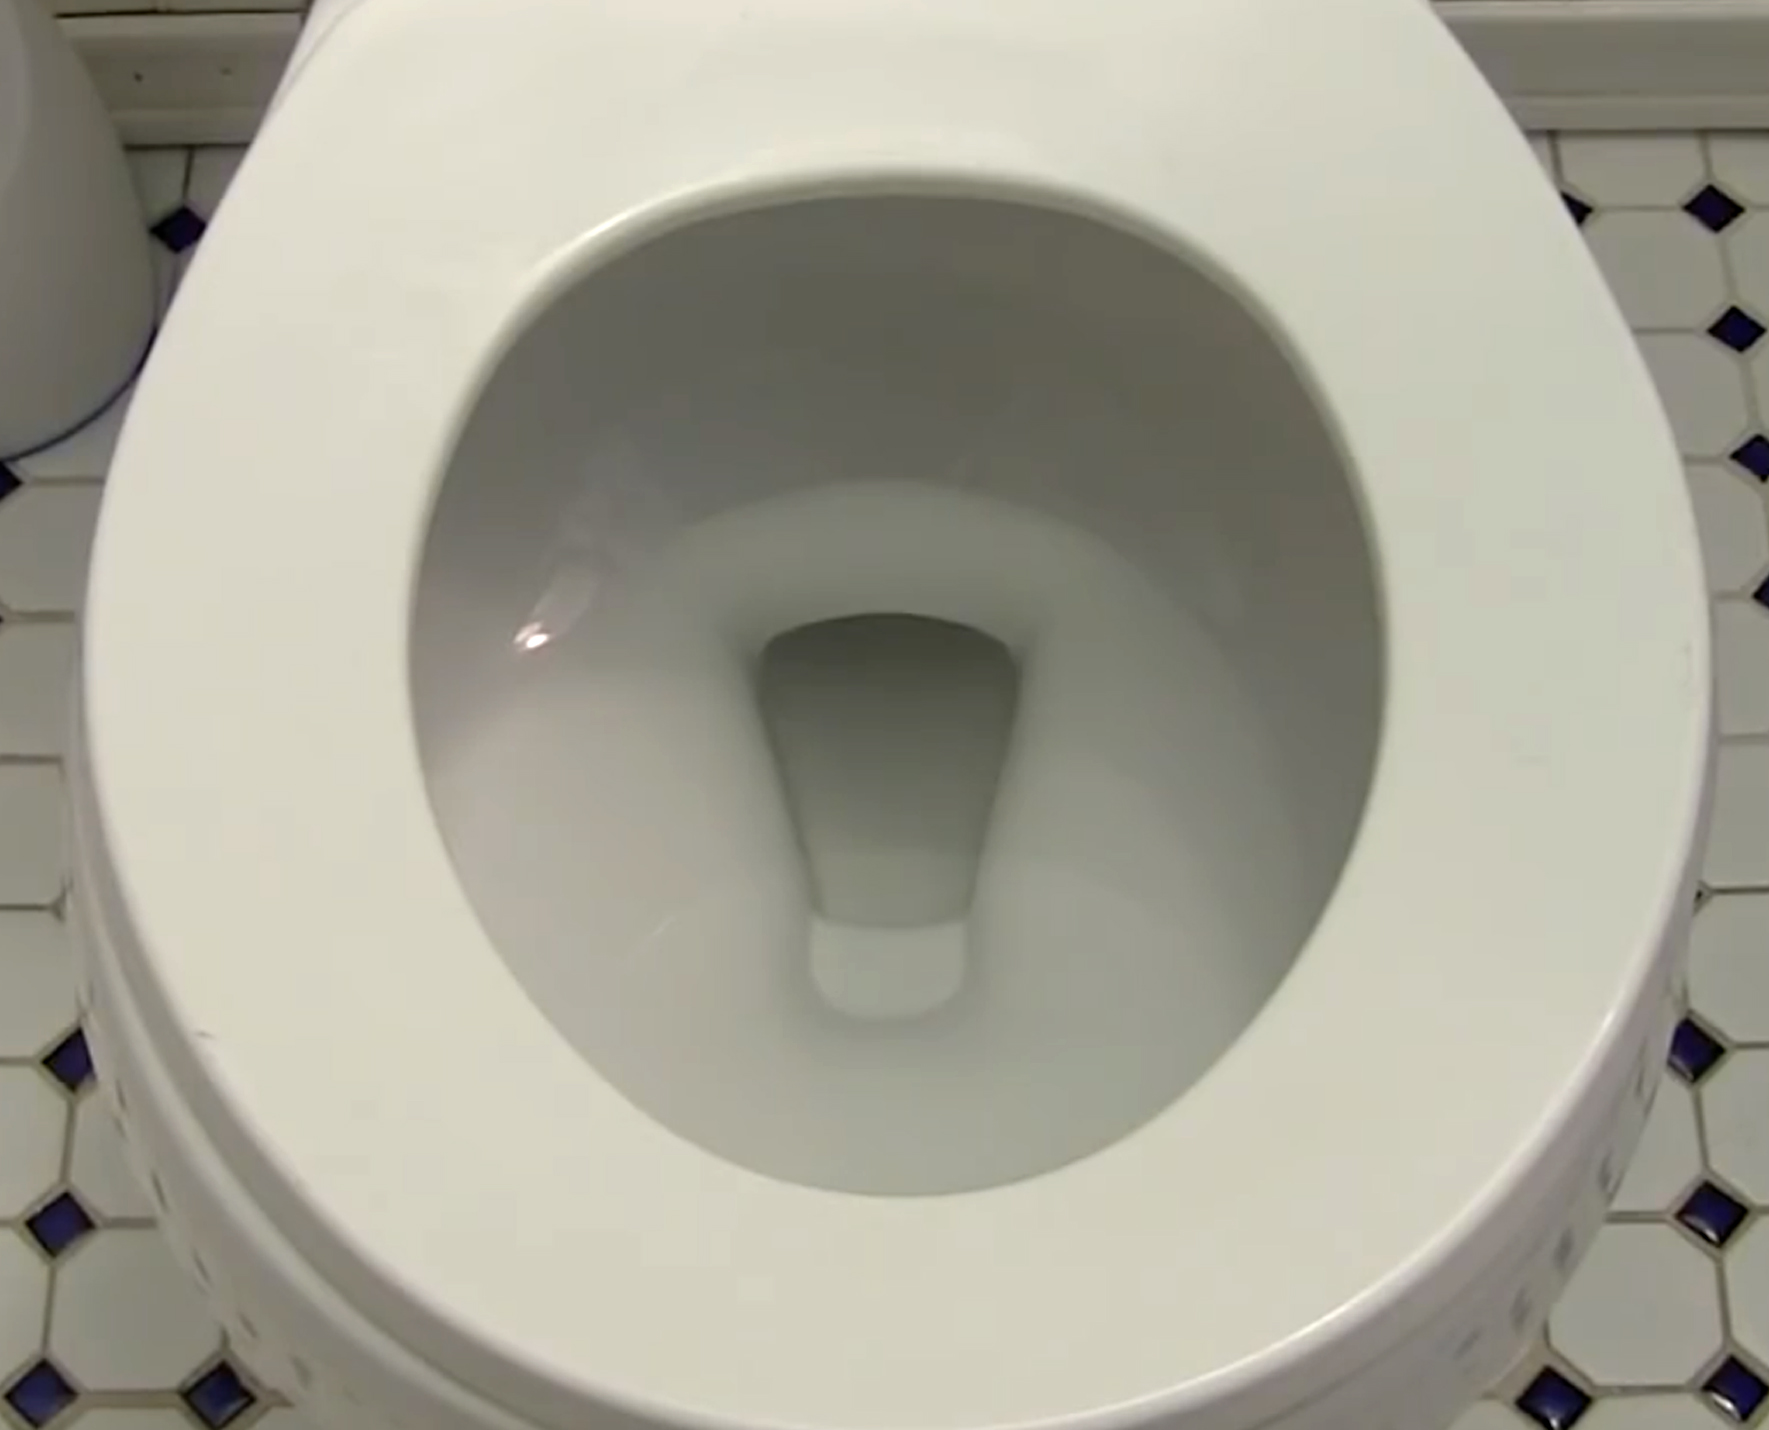 Toilet with no blue dye in the bowl